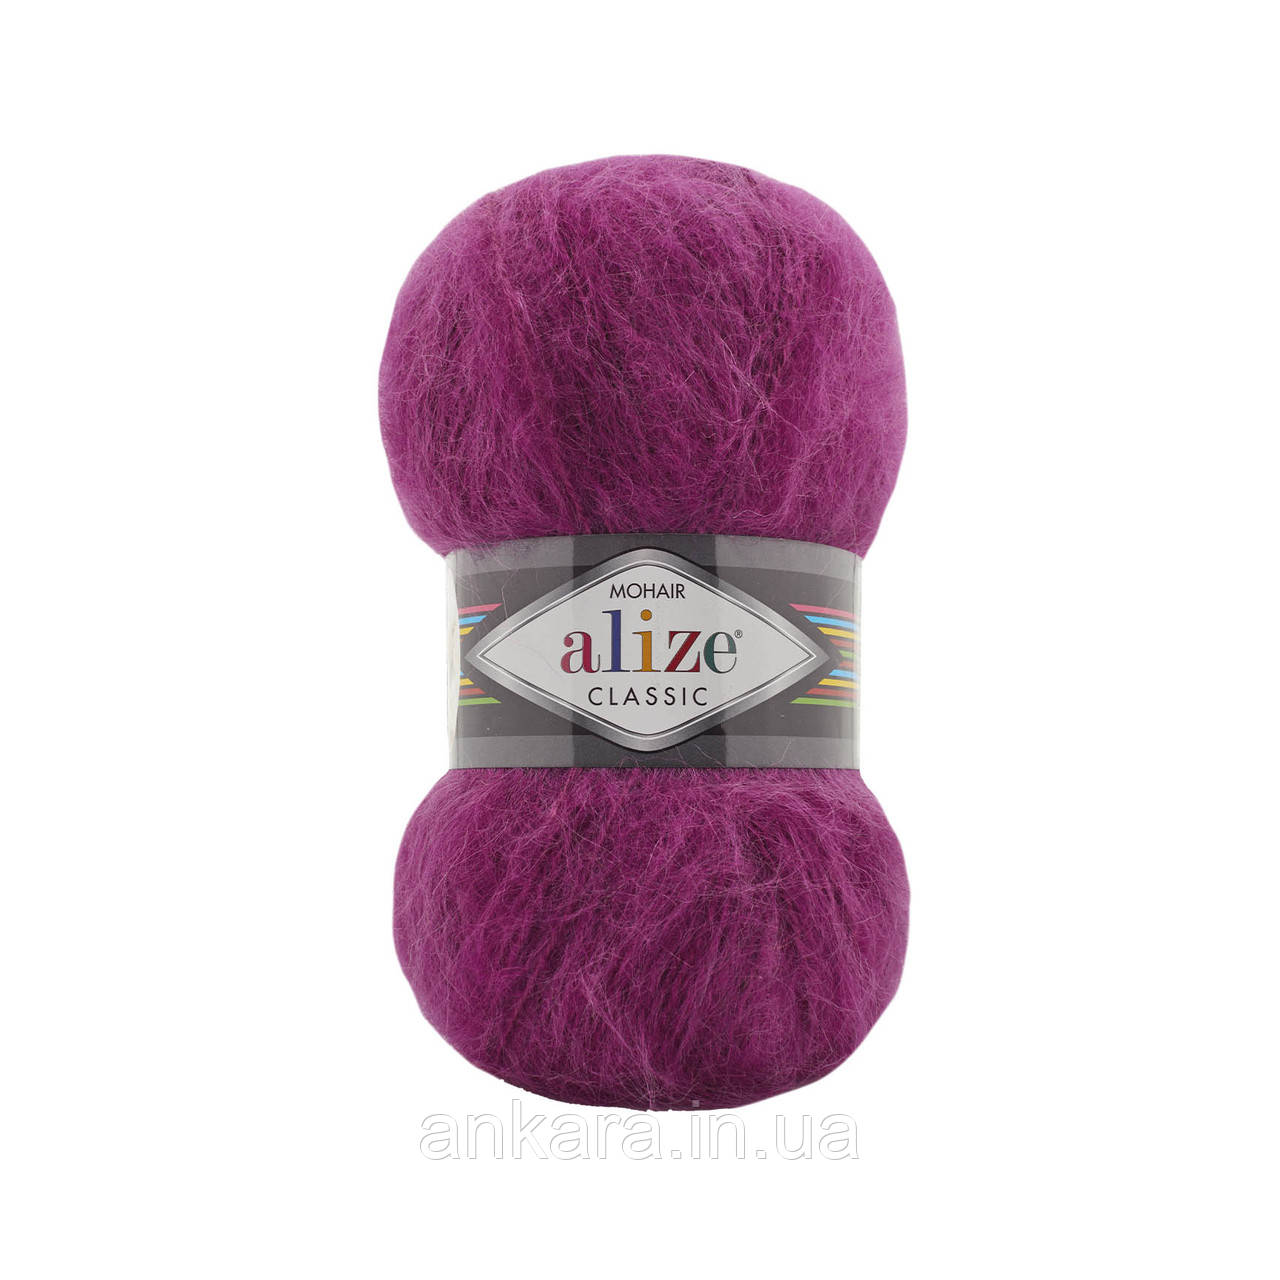 Alize Mohair Classic 209